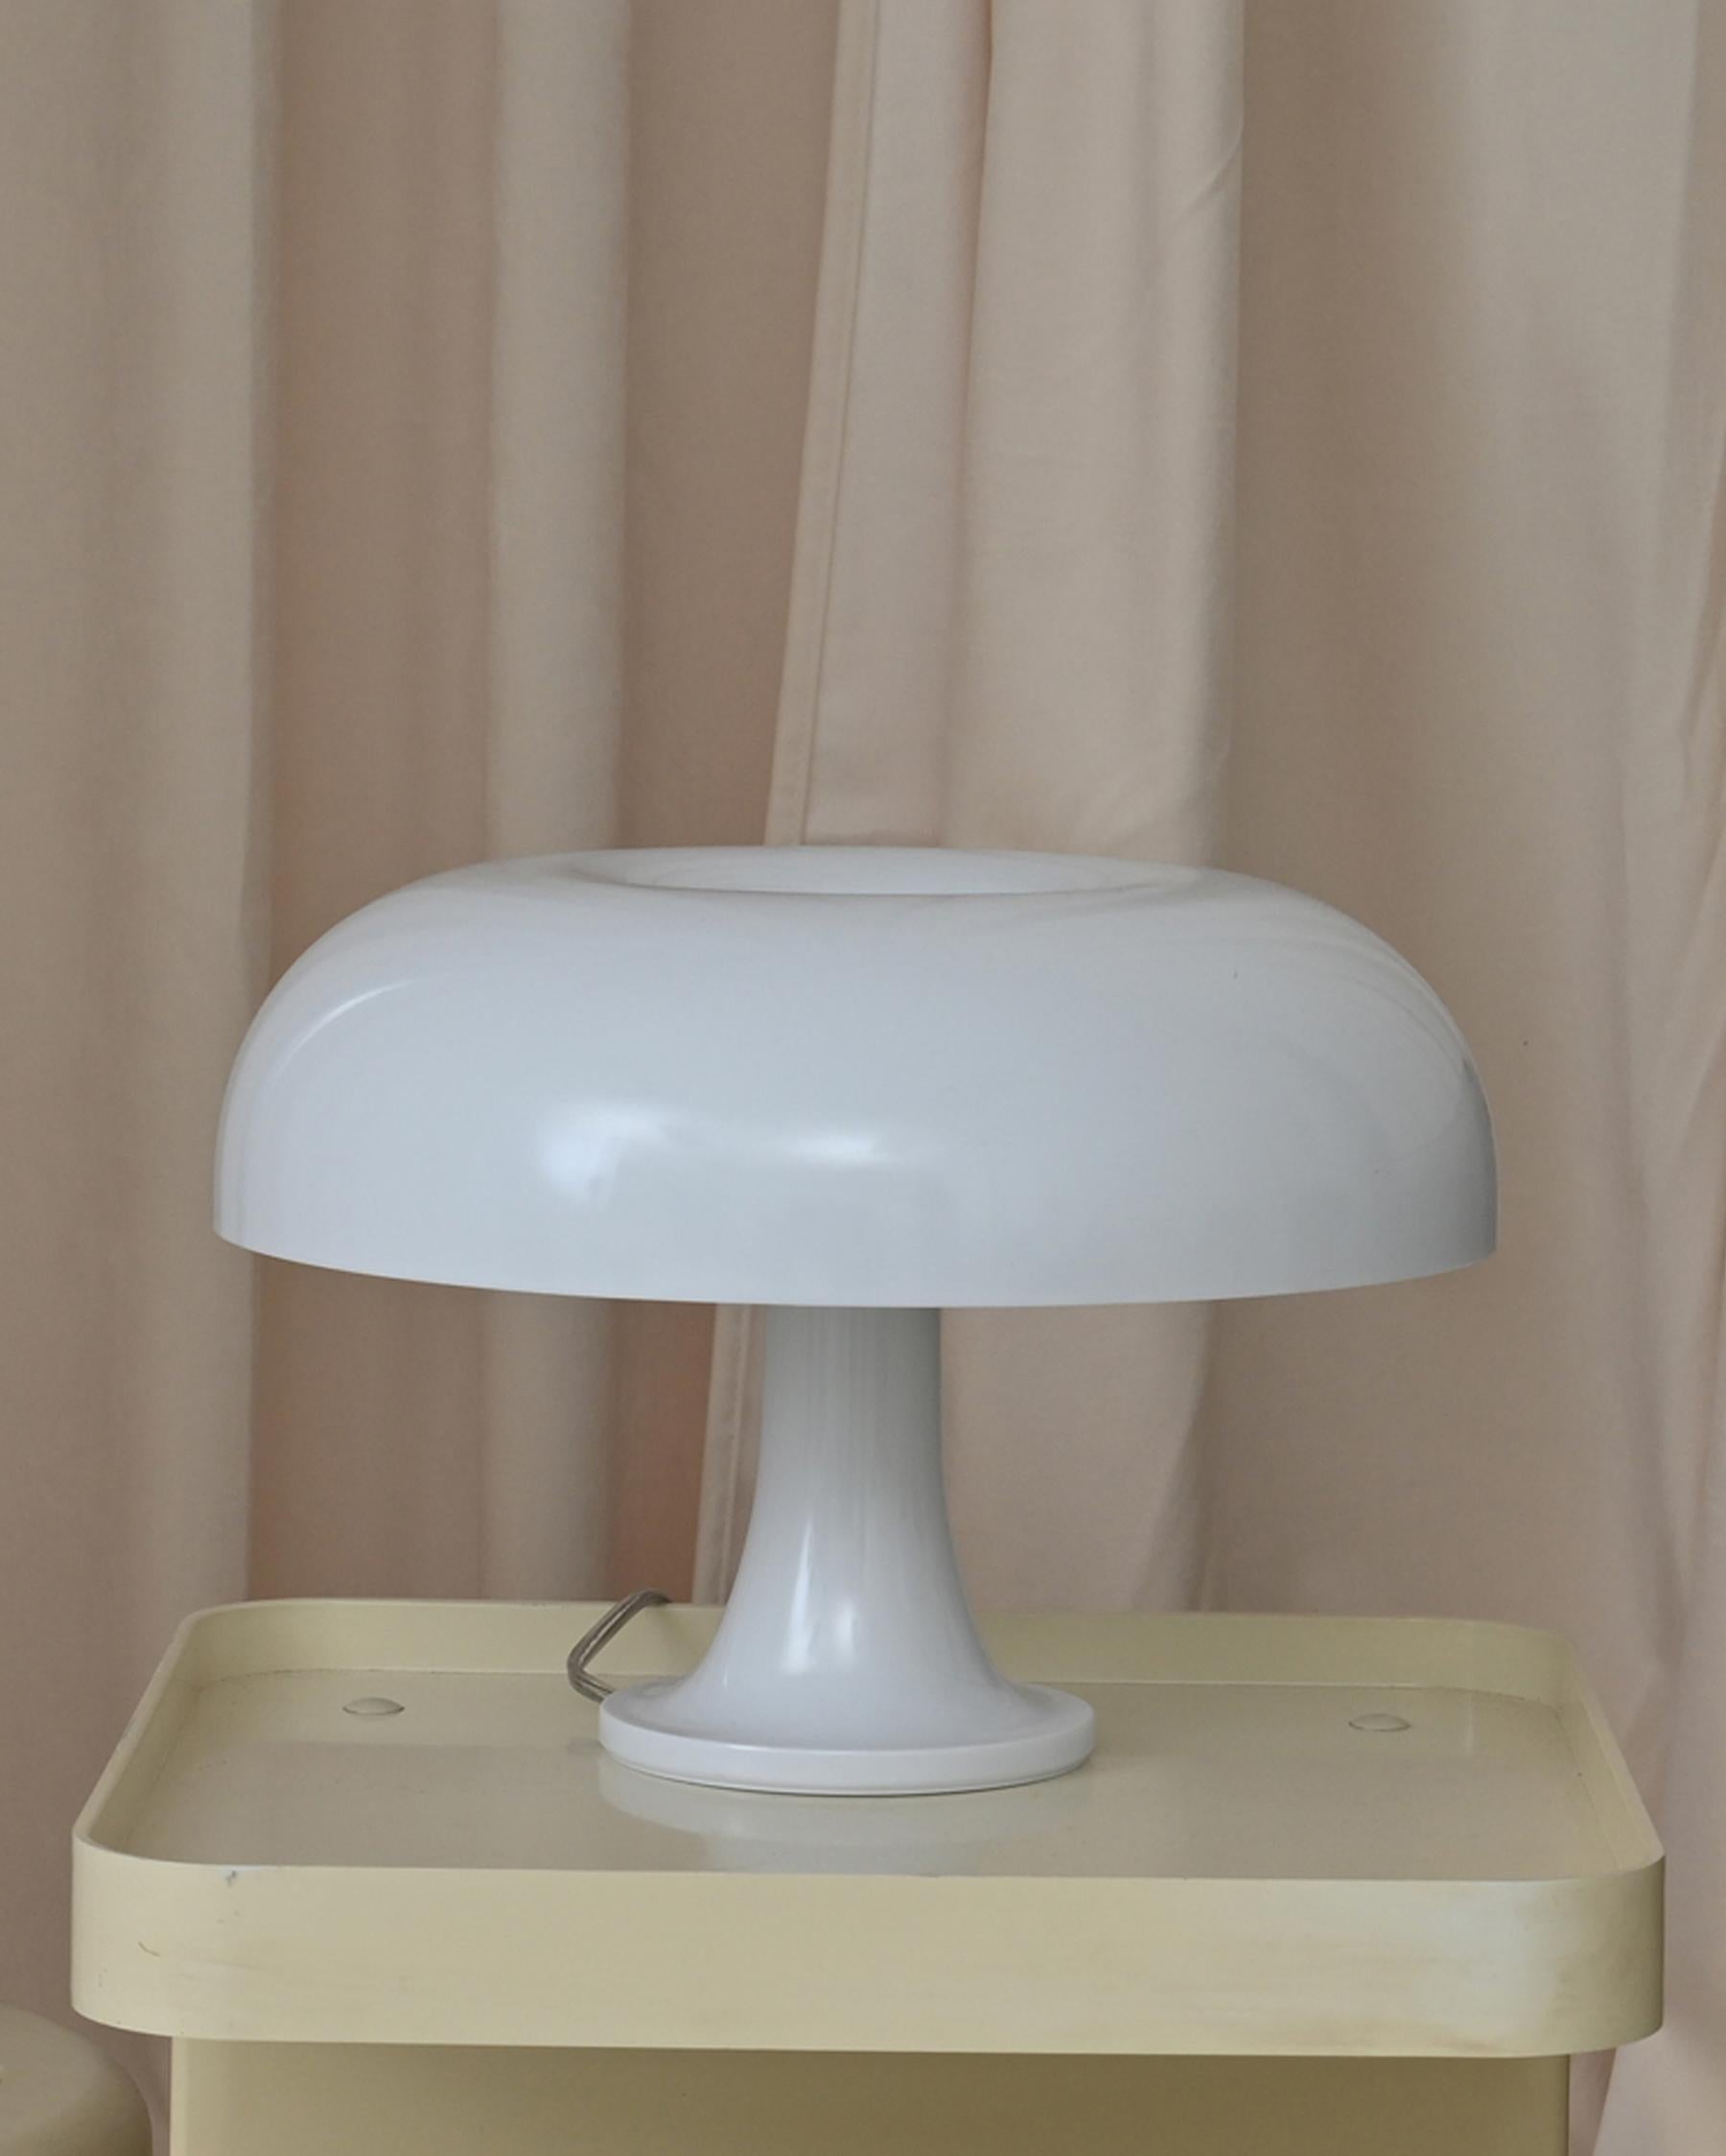 Designed by Giancarlo Mattioli for Artemide since the 1960s. This is a new-in-box recent production of the lamp. ABS plastic. Made in Italy. Comes with box, tag, and box literature. This lamp was inspired by nature. It is displayed in the Design